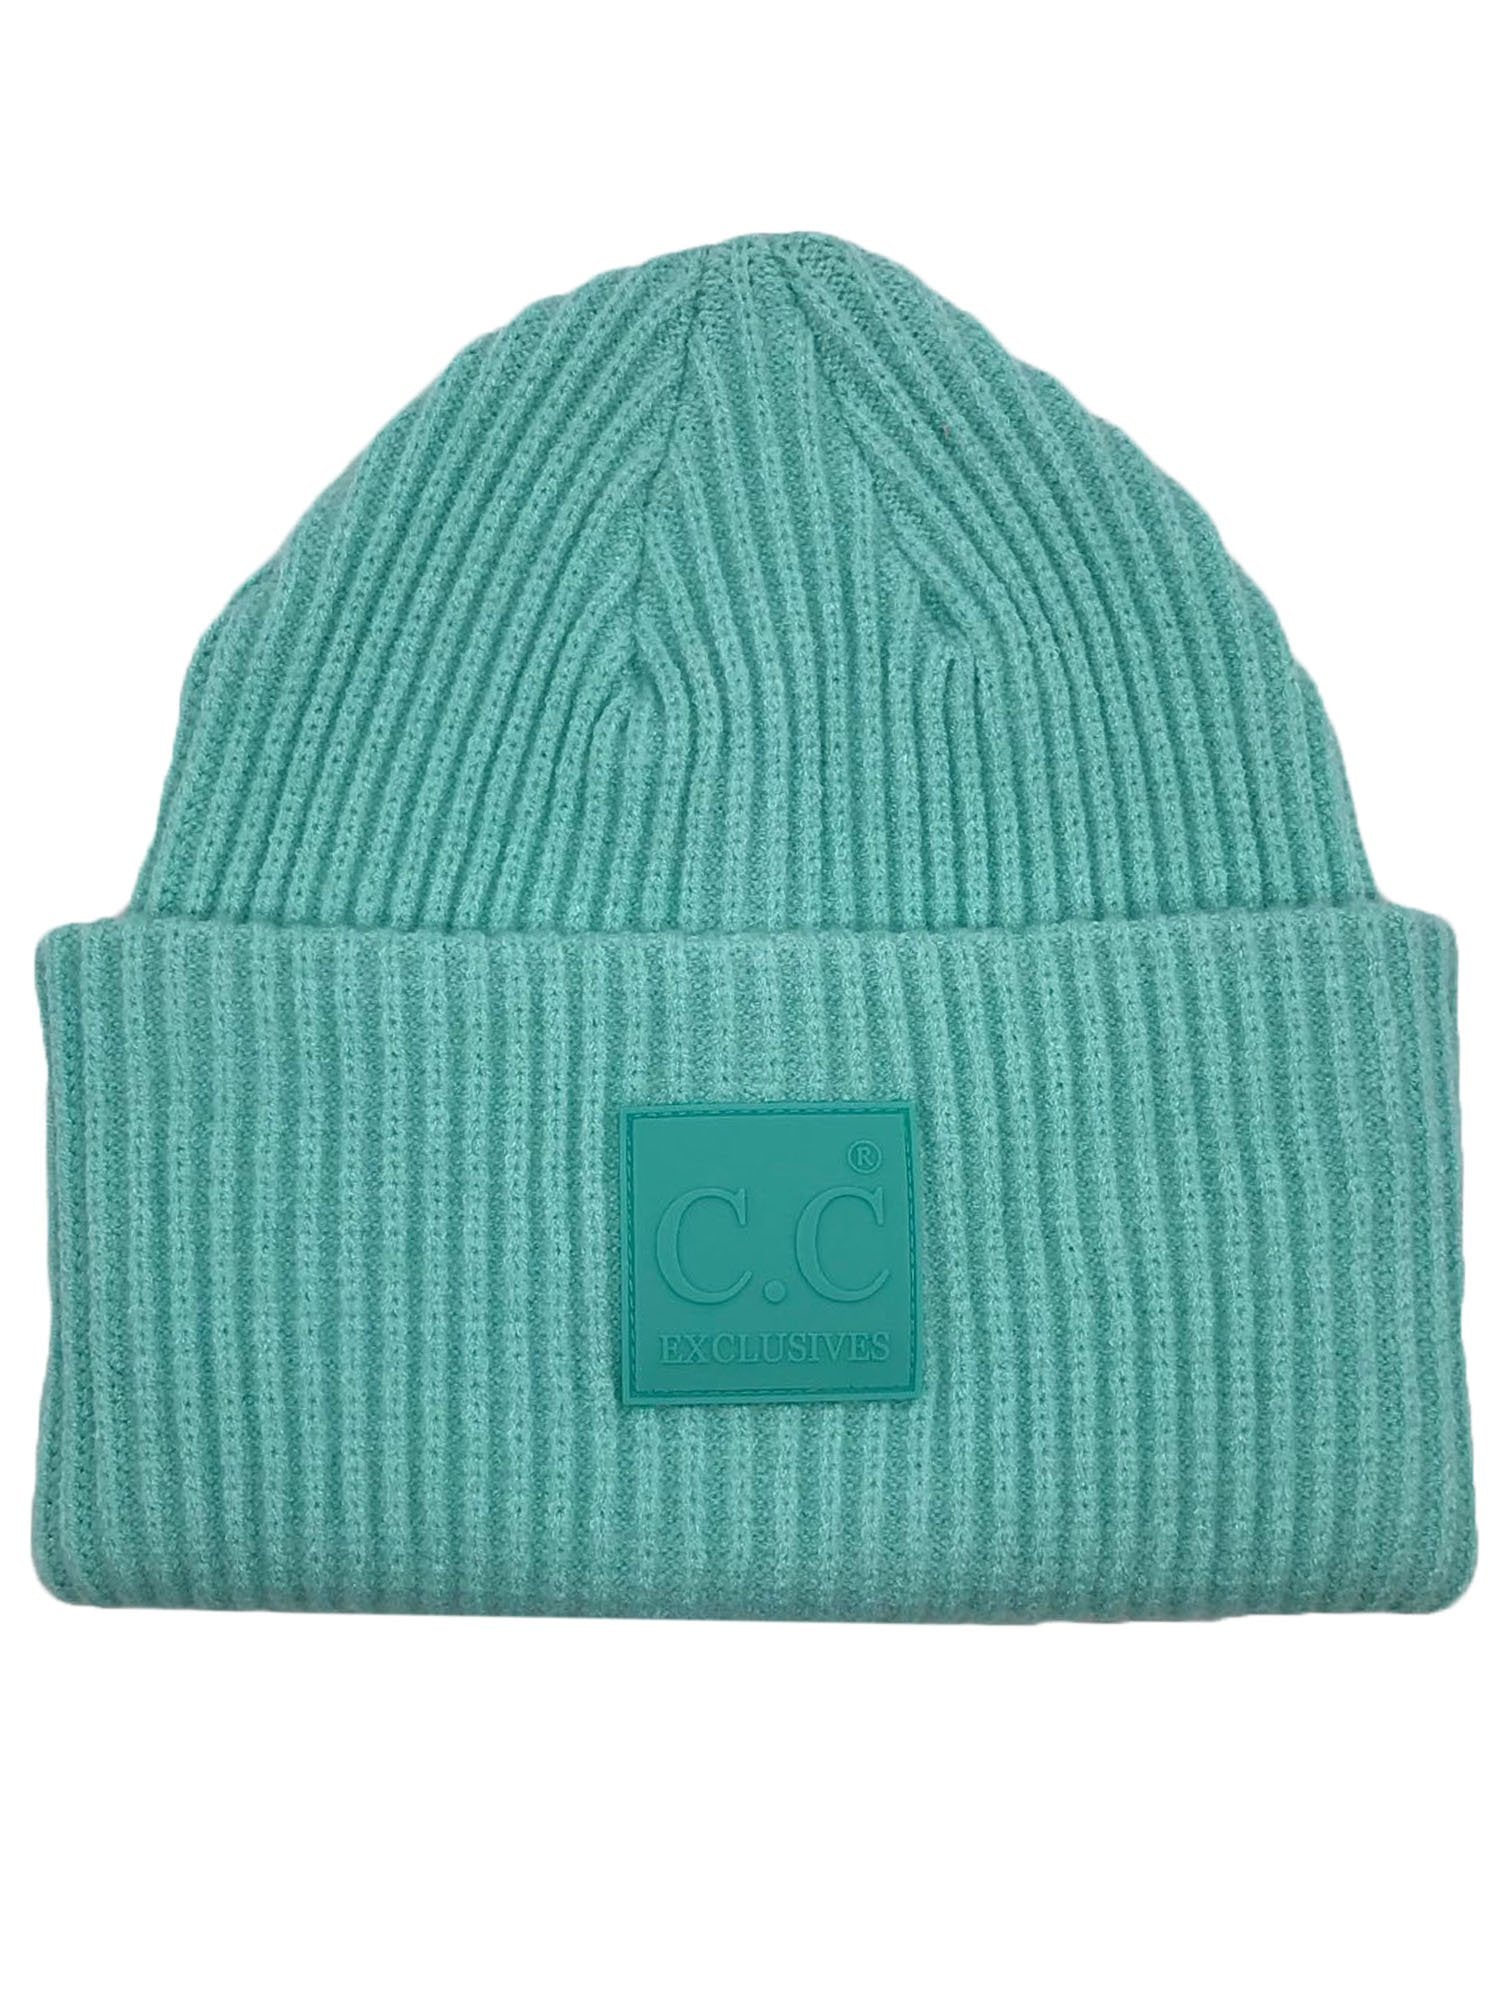 HAT-7007 Beanie with Rubber Patch Mint Green